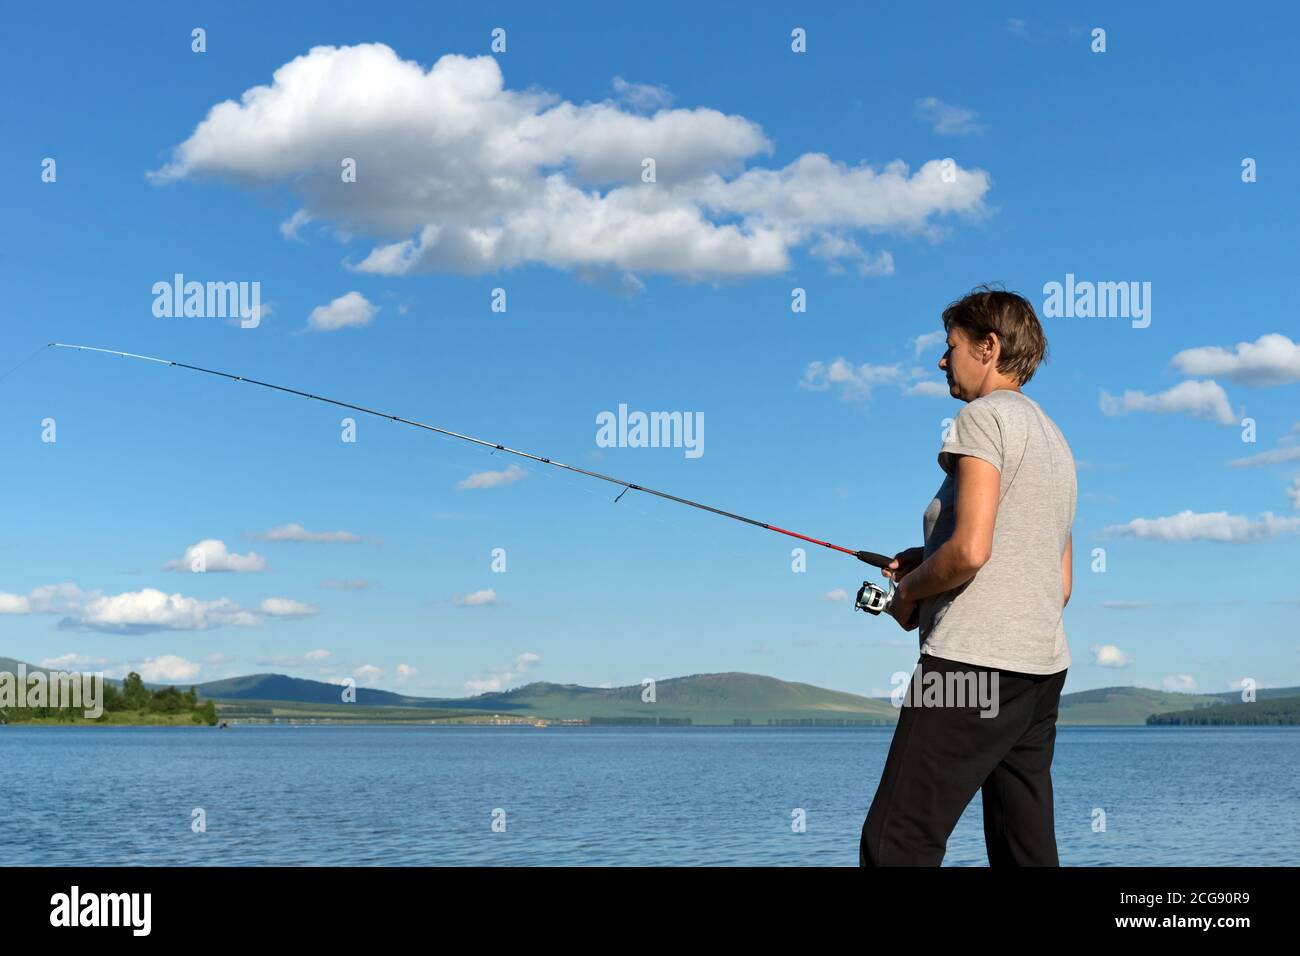 Woman fisherman catches a fish from a blue lake against a blue sky with clouds. Stock Photo